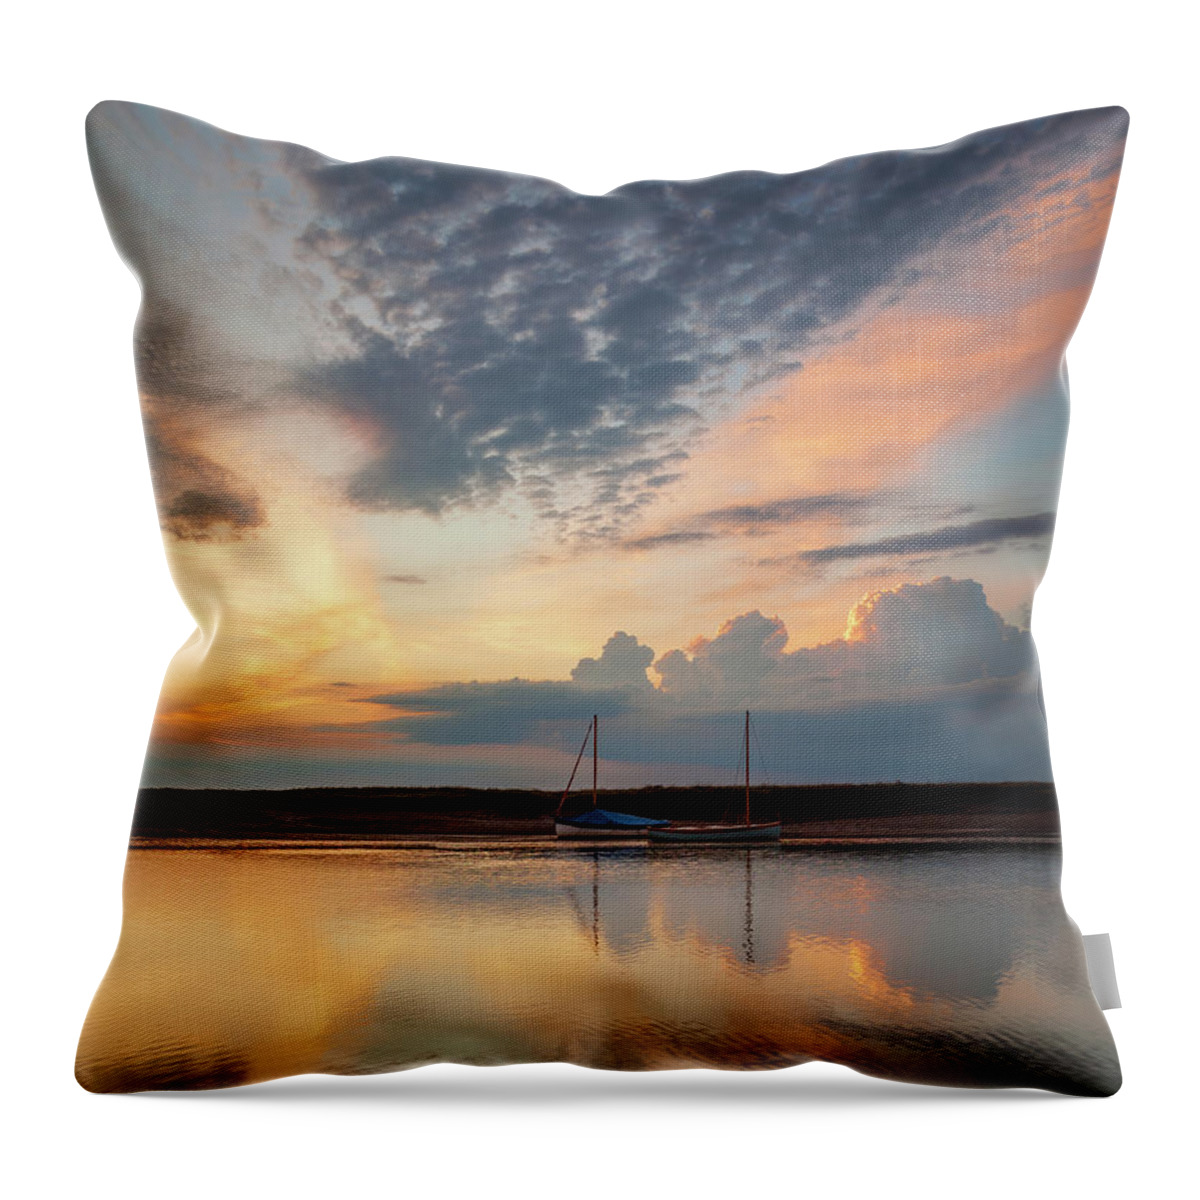 Burnham Overy Sunset Throw Pillow featuring the photograph Evening colour in the sky at Burnham Overy Staithe by David Powley